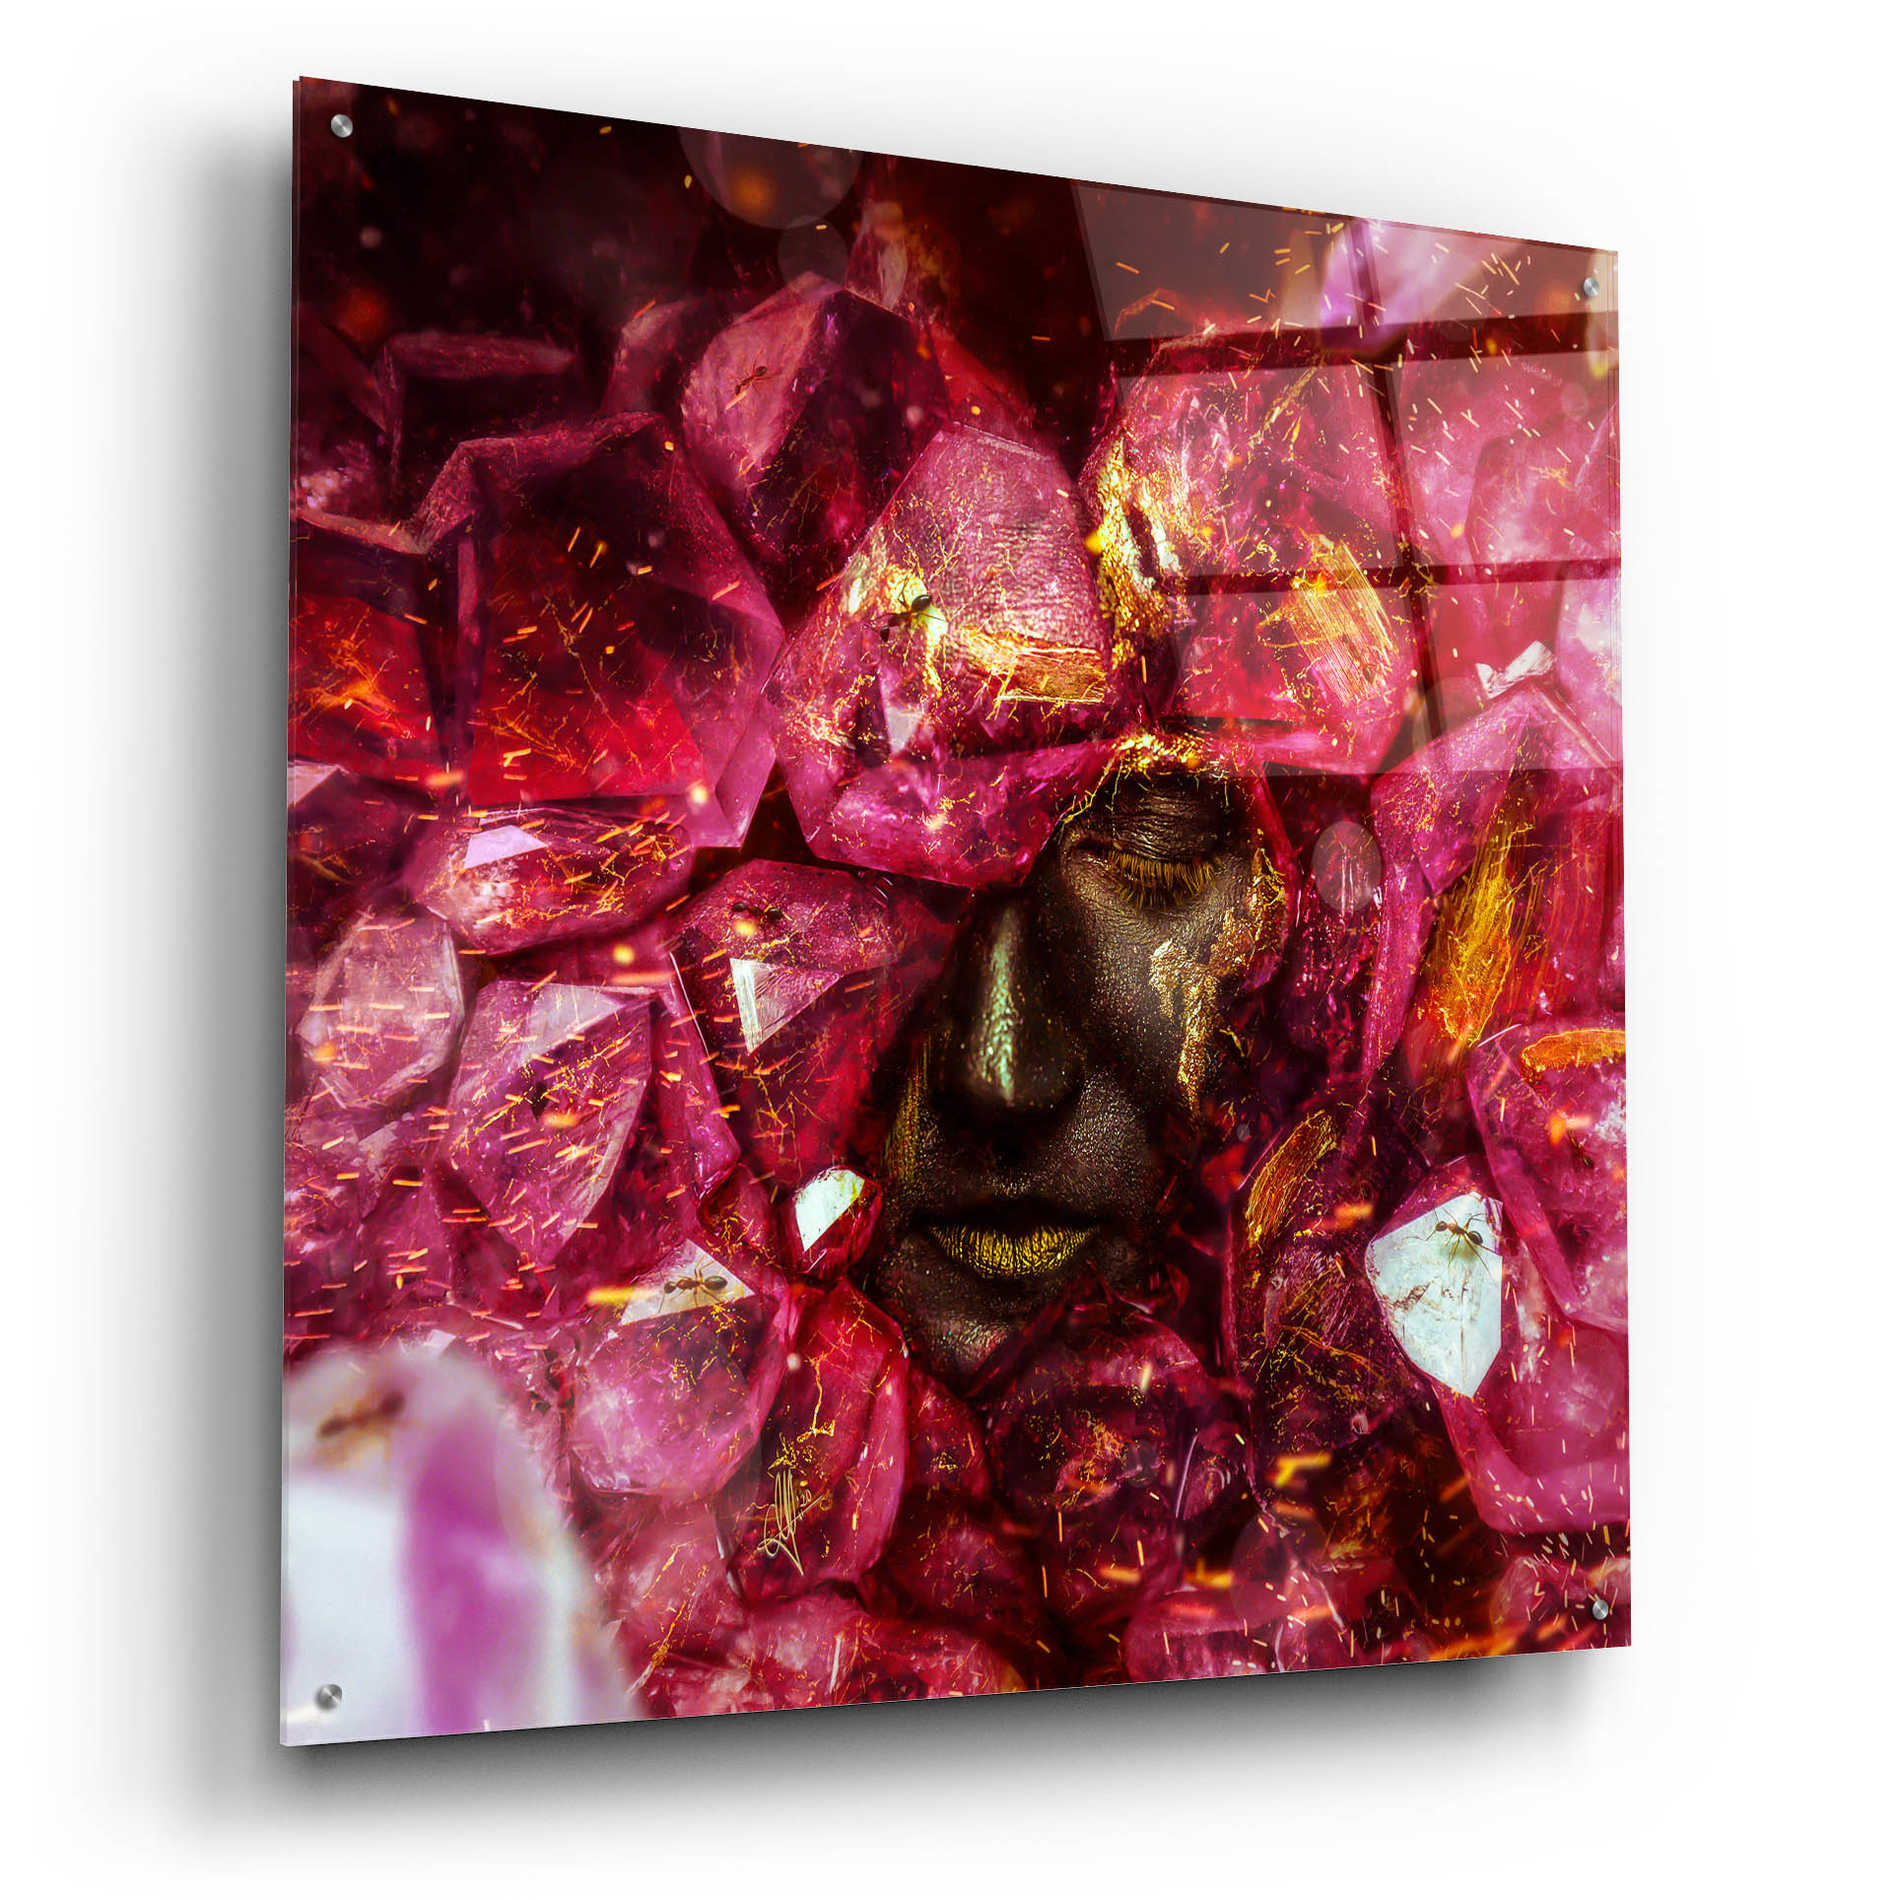 Epic Art 'States of the Matter - Crystallize' by Mario Sanchez Nevado, Acrylic Glass Wall Art,36x36